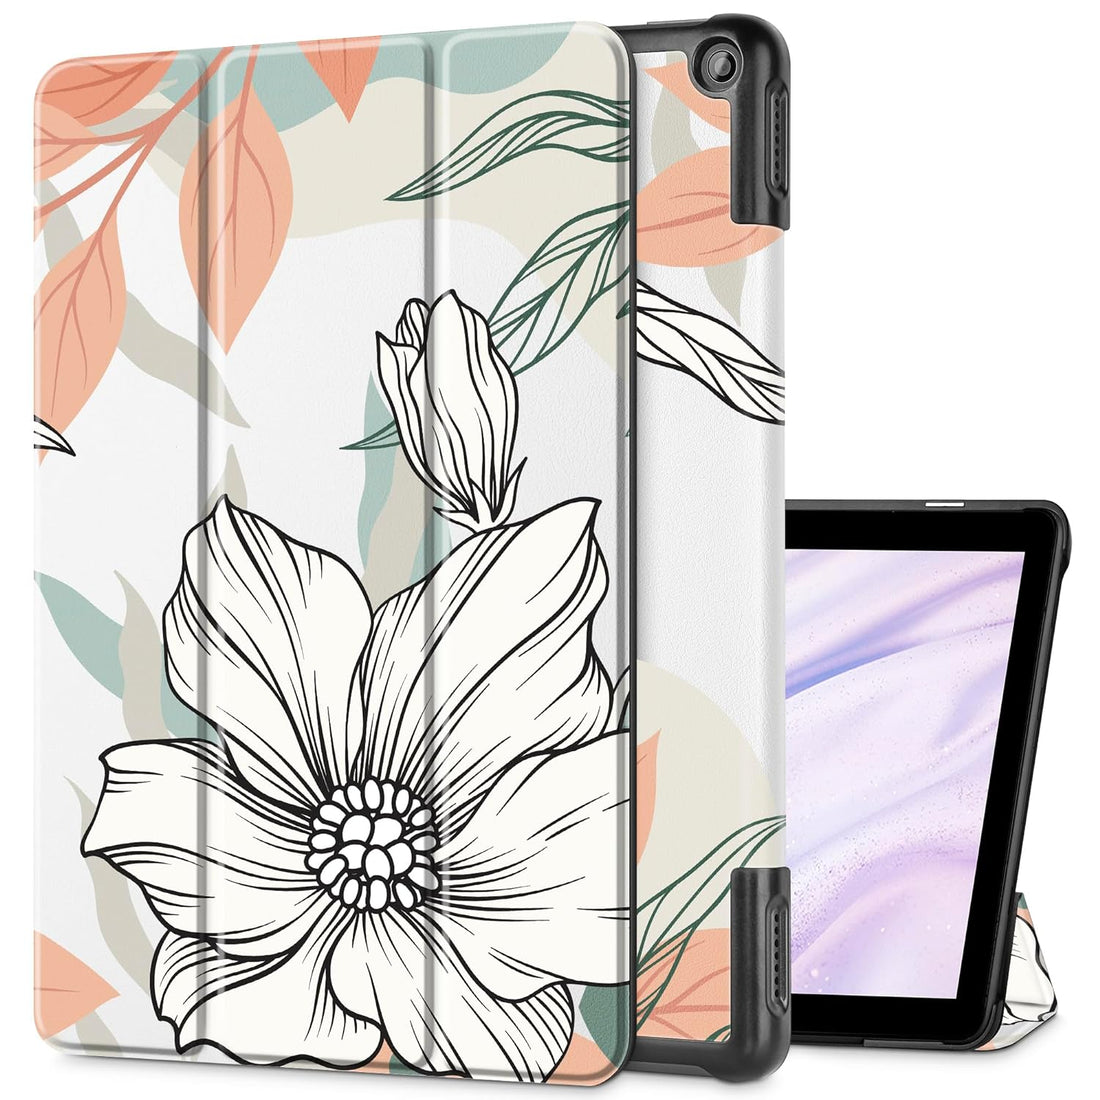 Mektron Case for All-New Amazon Fire HD 10 Tablet 2023 Release, Slim Fit Standing Cover with Auto Sleep/Wake,Floral S760